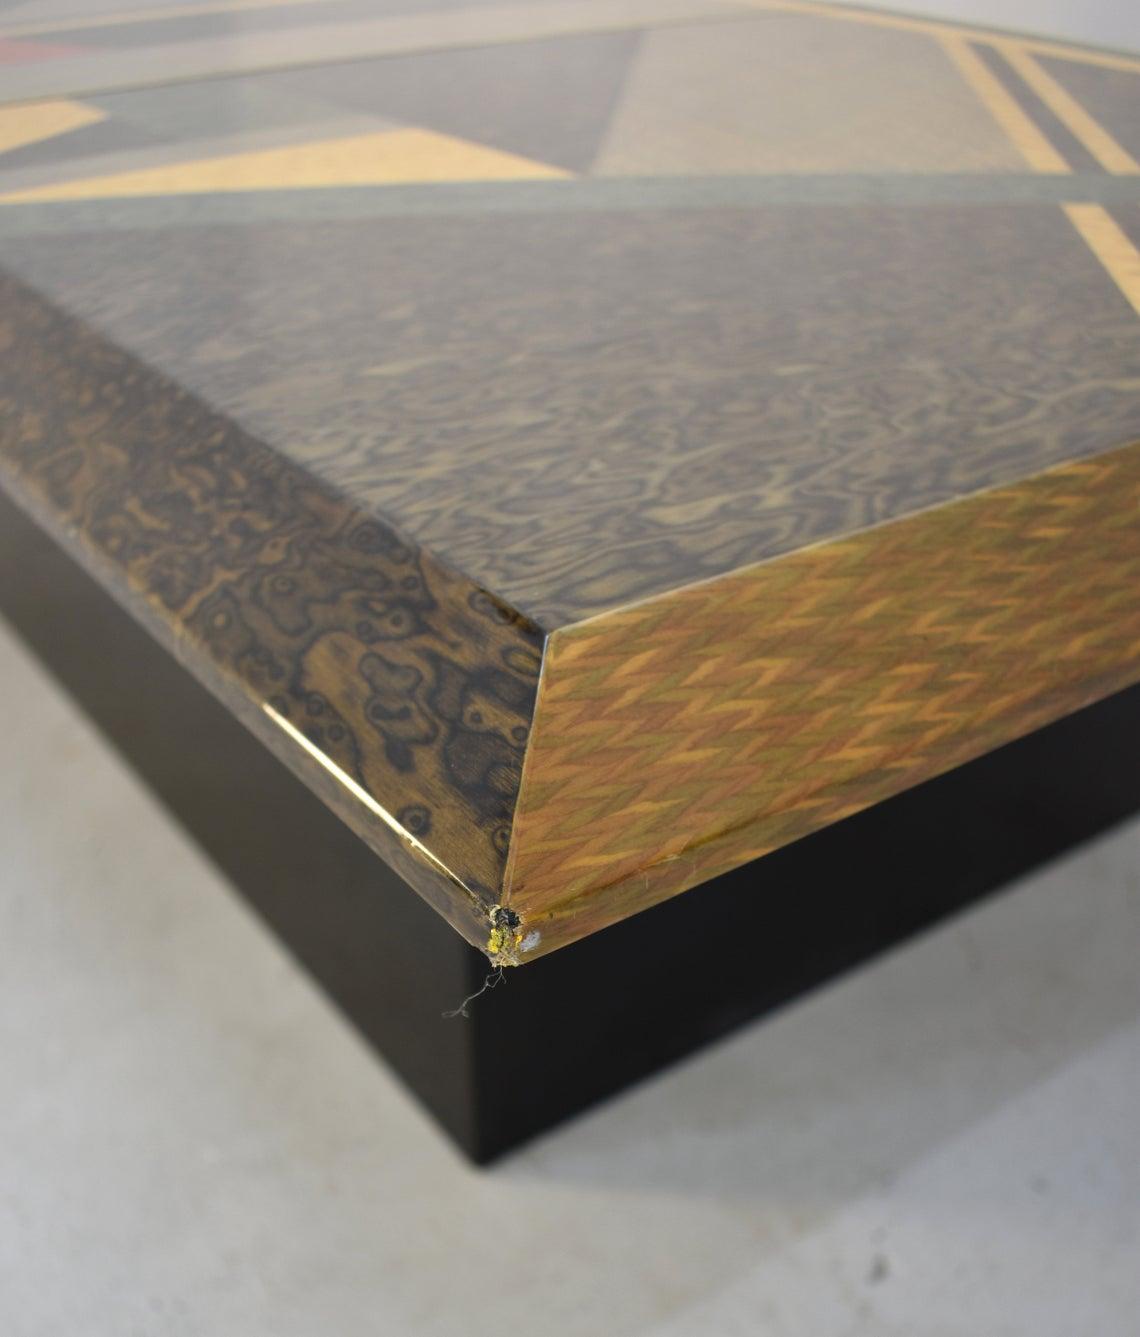 Burl Postmodern Mosaic Coffee Table by Giovanni Offredi for Saporiti, Italy 1980s